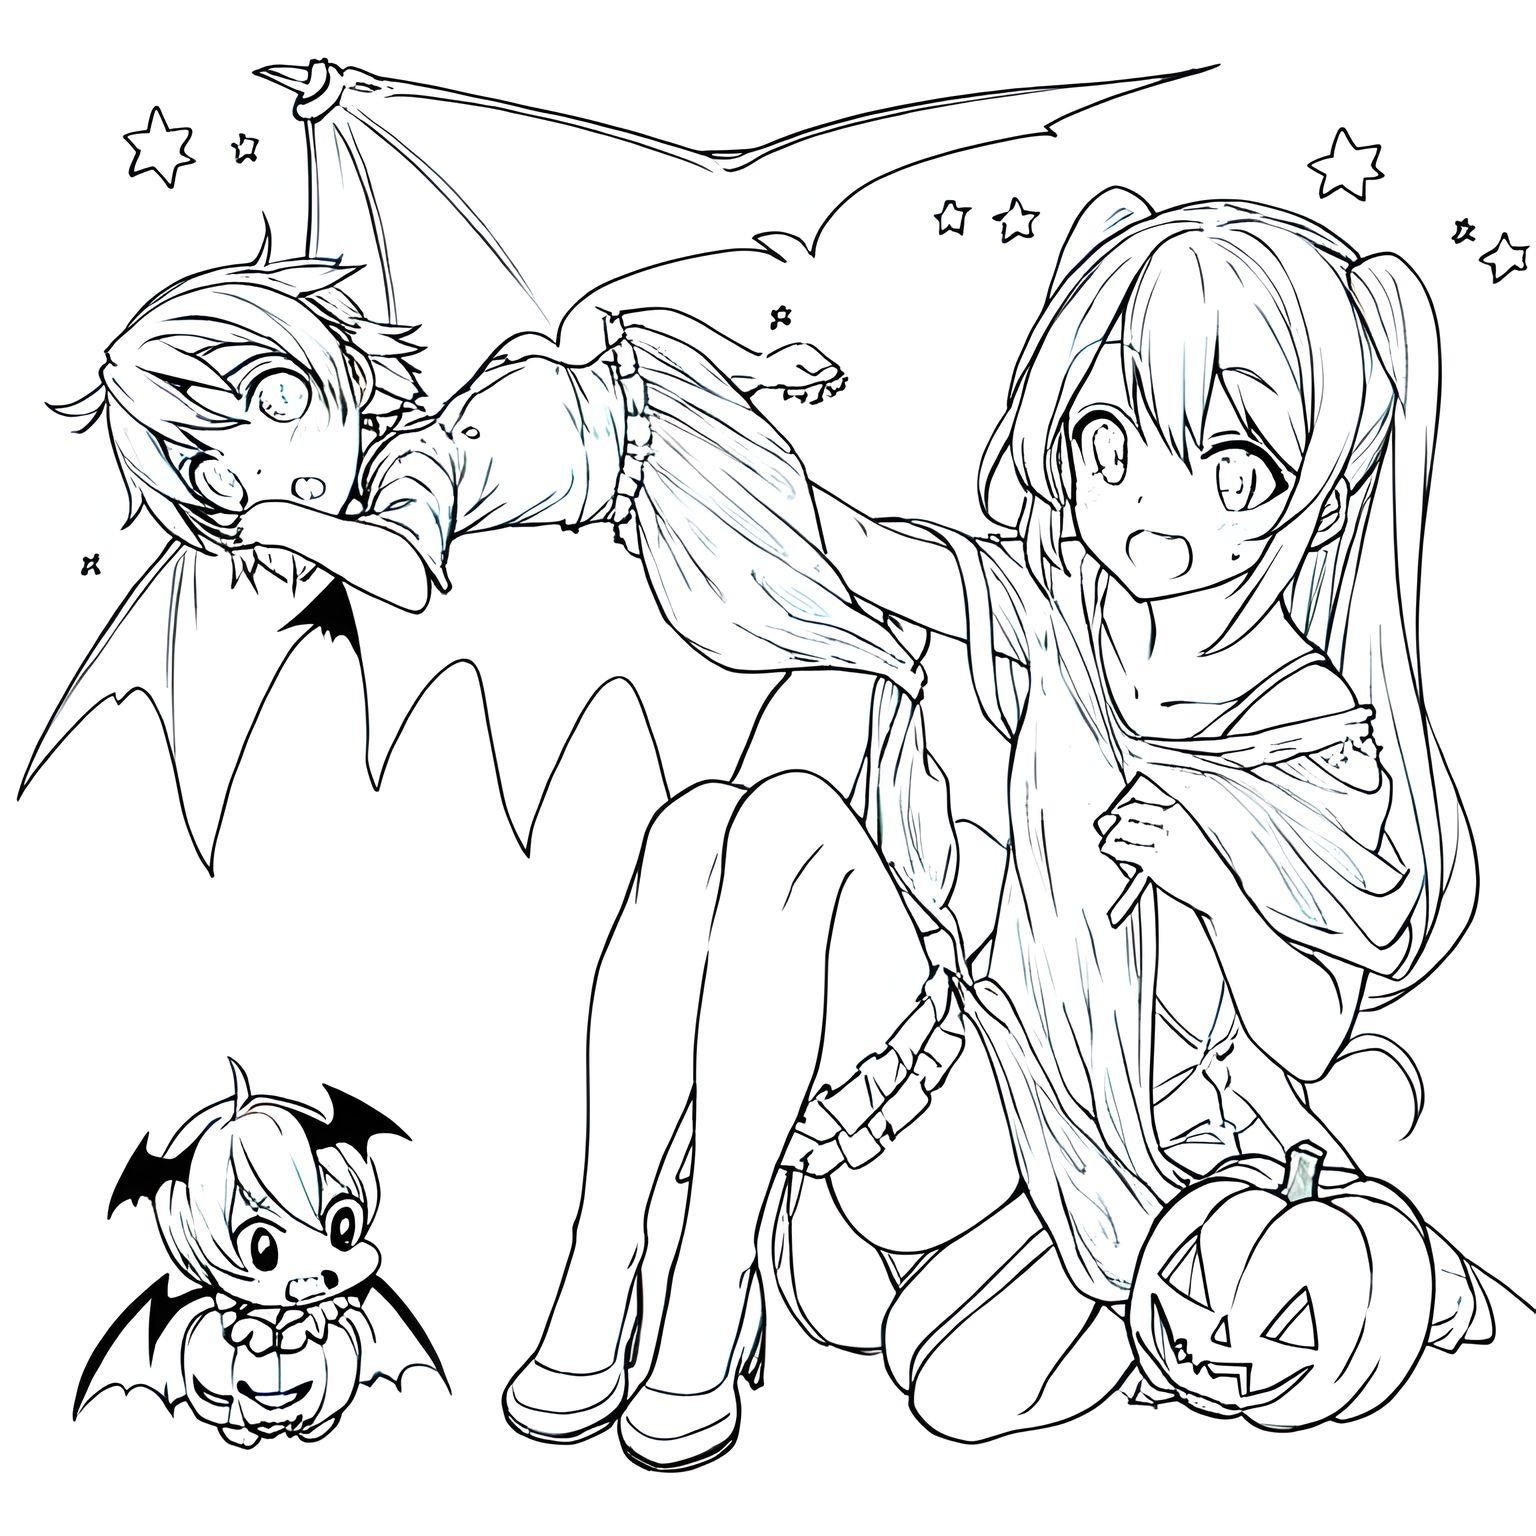 https://imgv3.fotor.com/images/gallery/cute-halloween-coloring-page-with-flying-bats.jpg